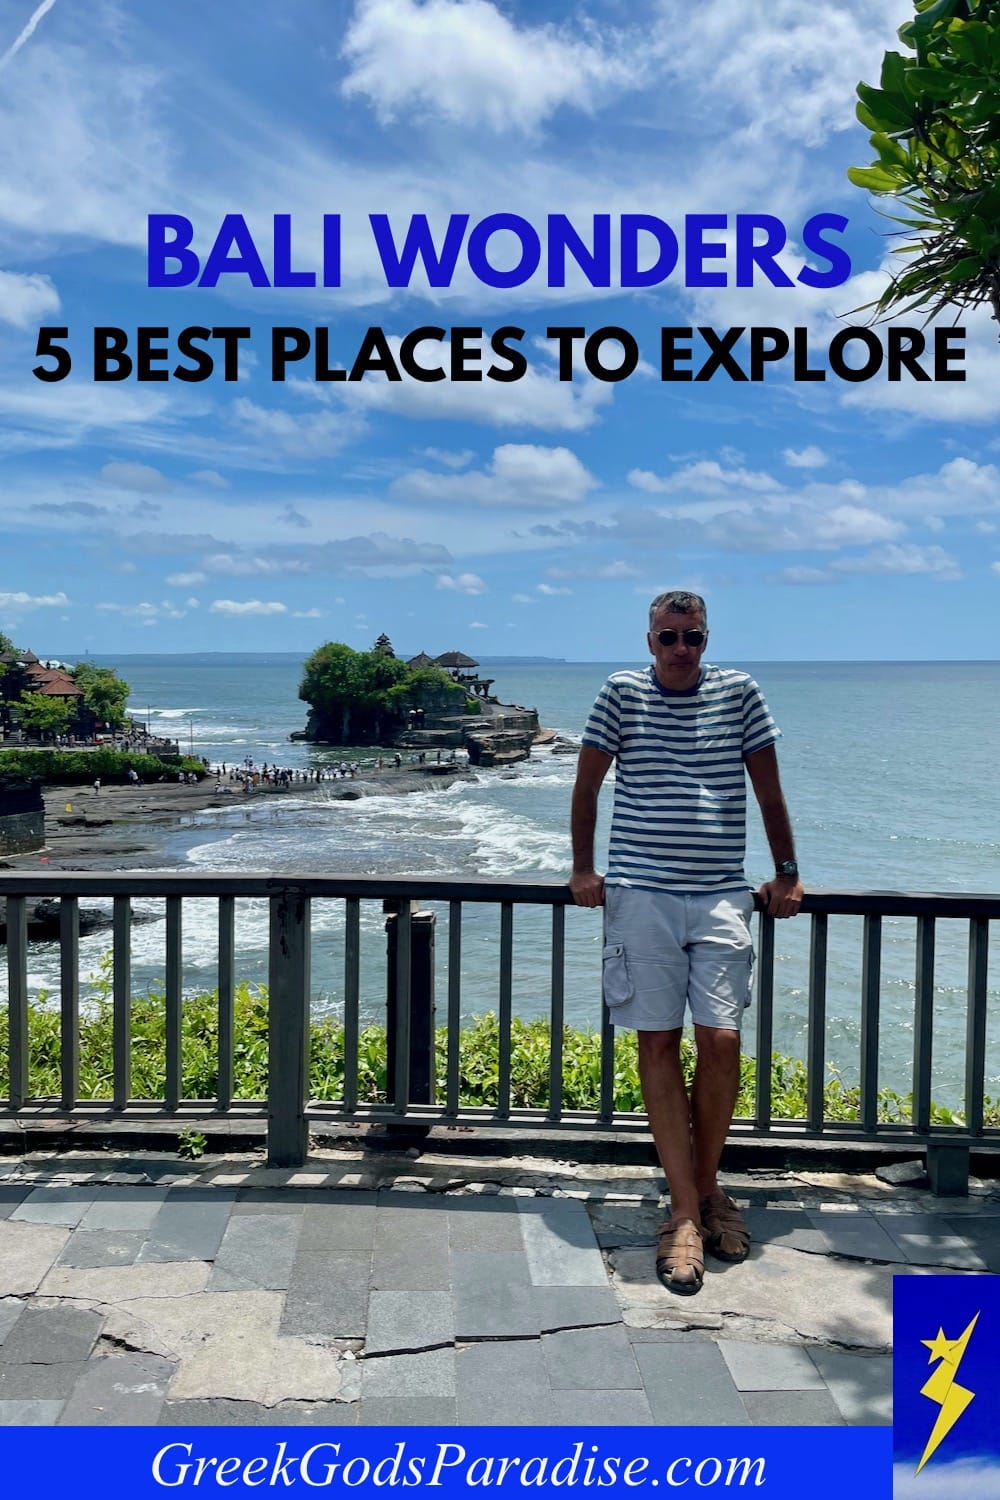 5 Best Places in Bali to Explore